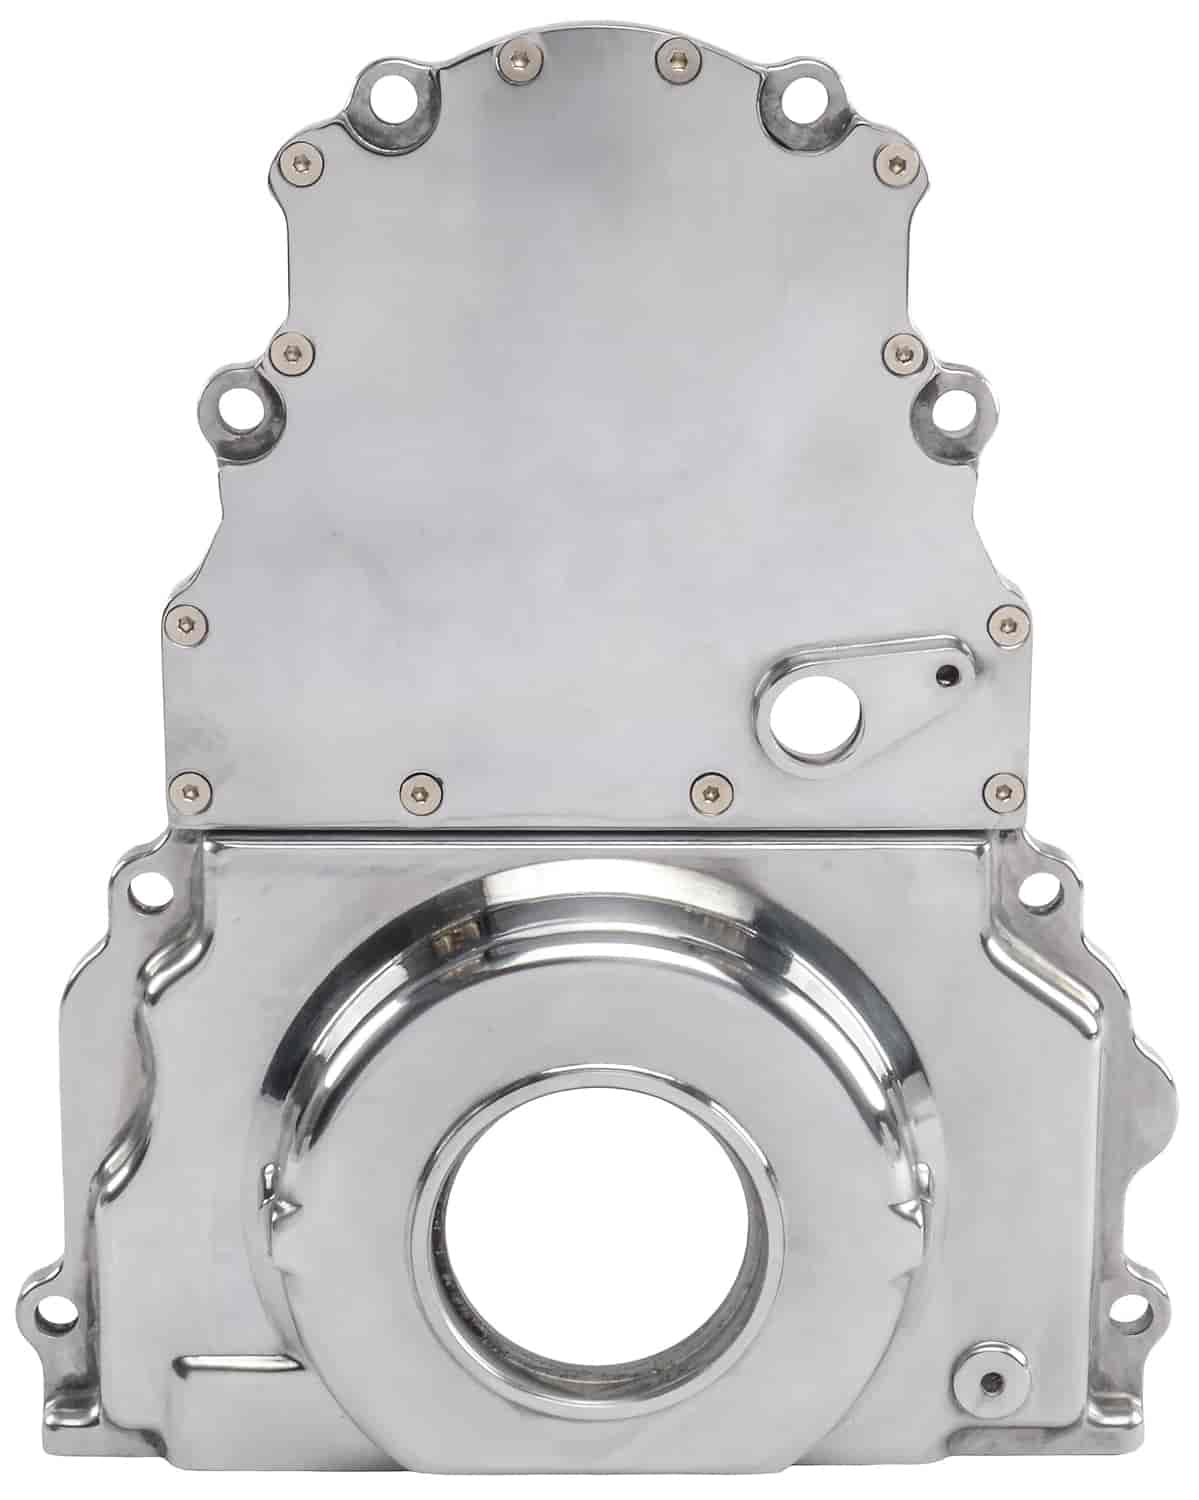 Timing Cover for GM LS Engines up to Gen IV with Front Mounted Cam Sensors [Polished Aluminum]